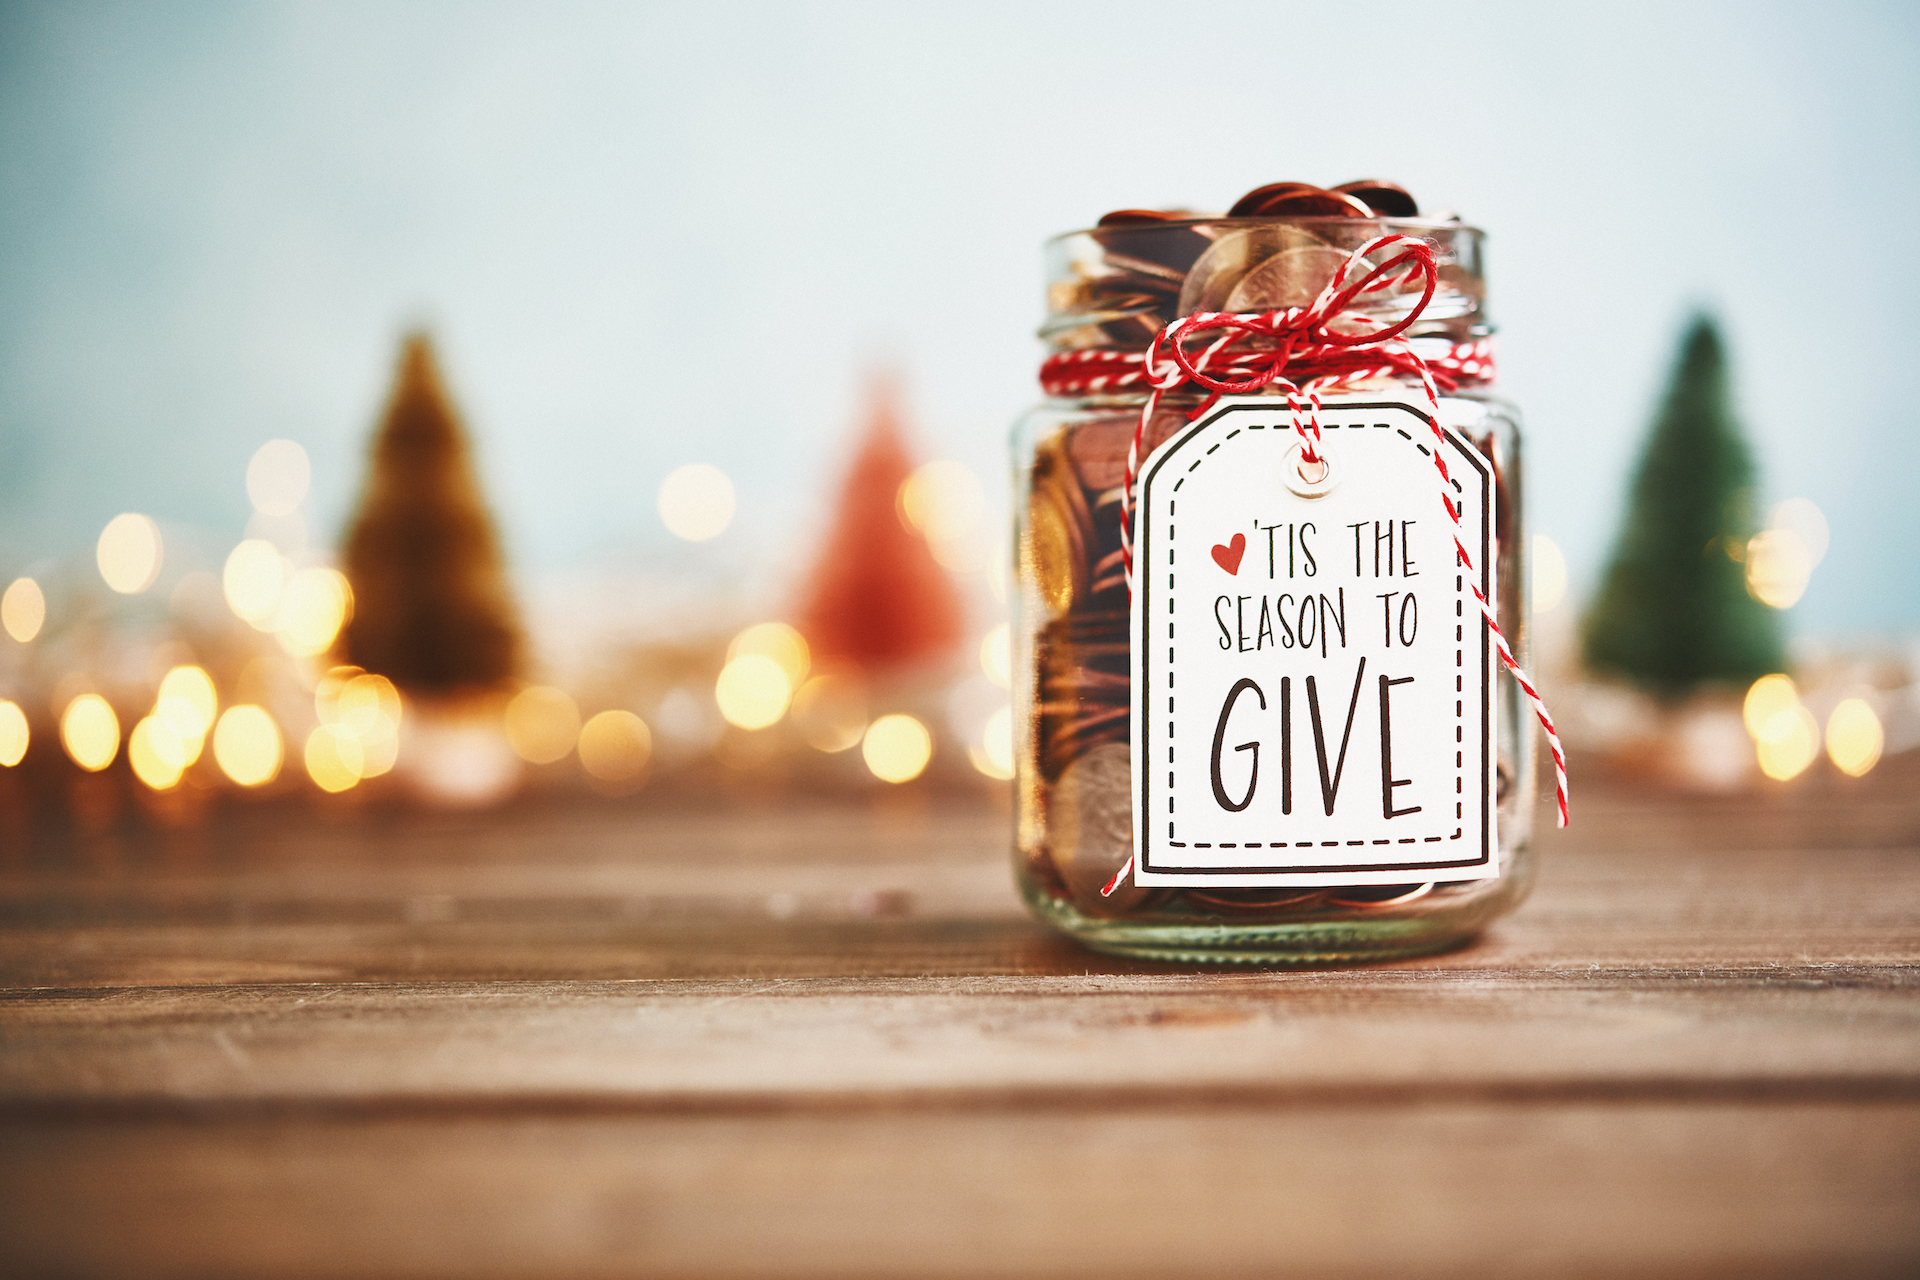 How to help others at Christmas volunteering, charity giving and kindness